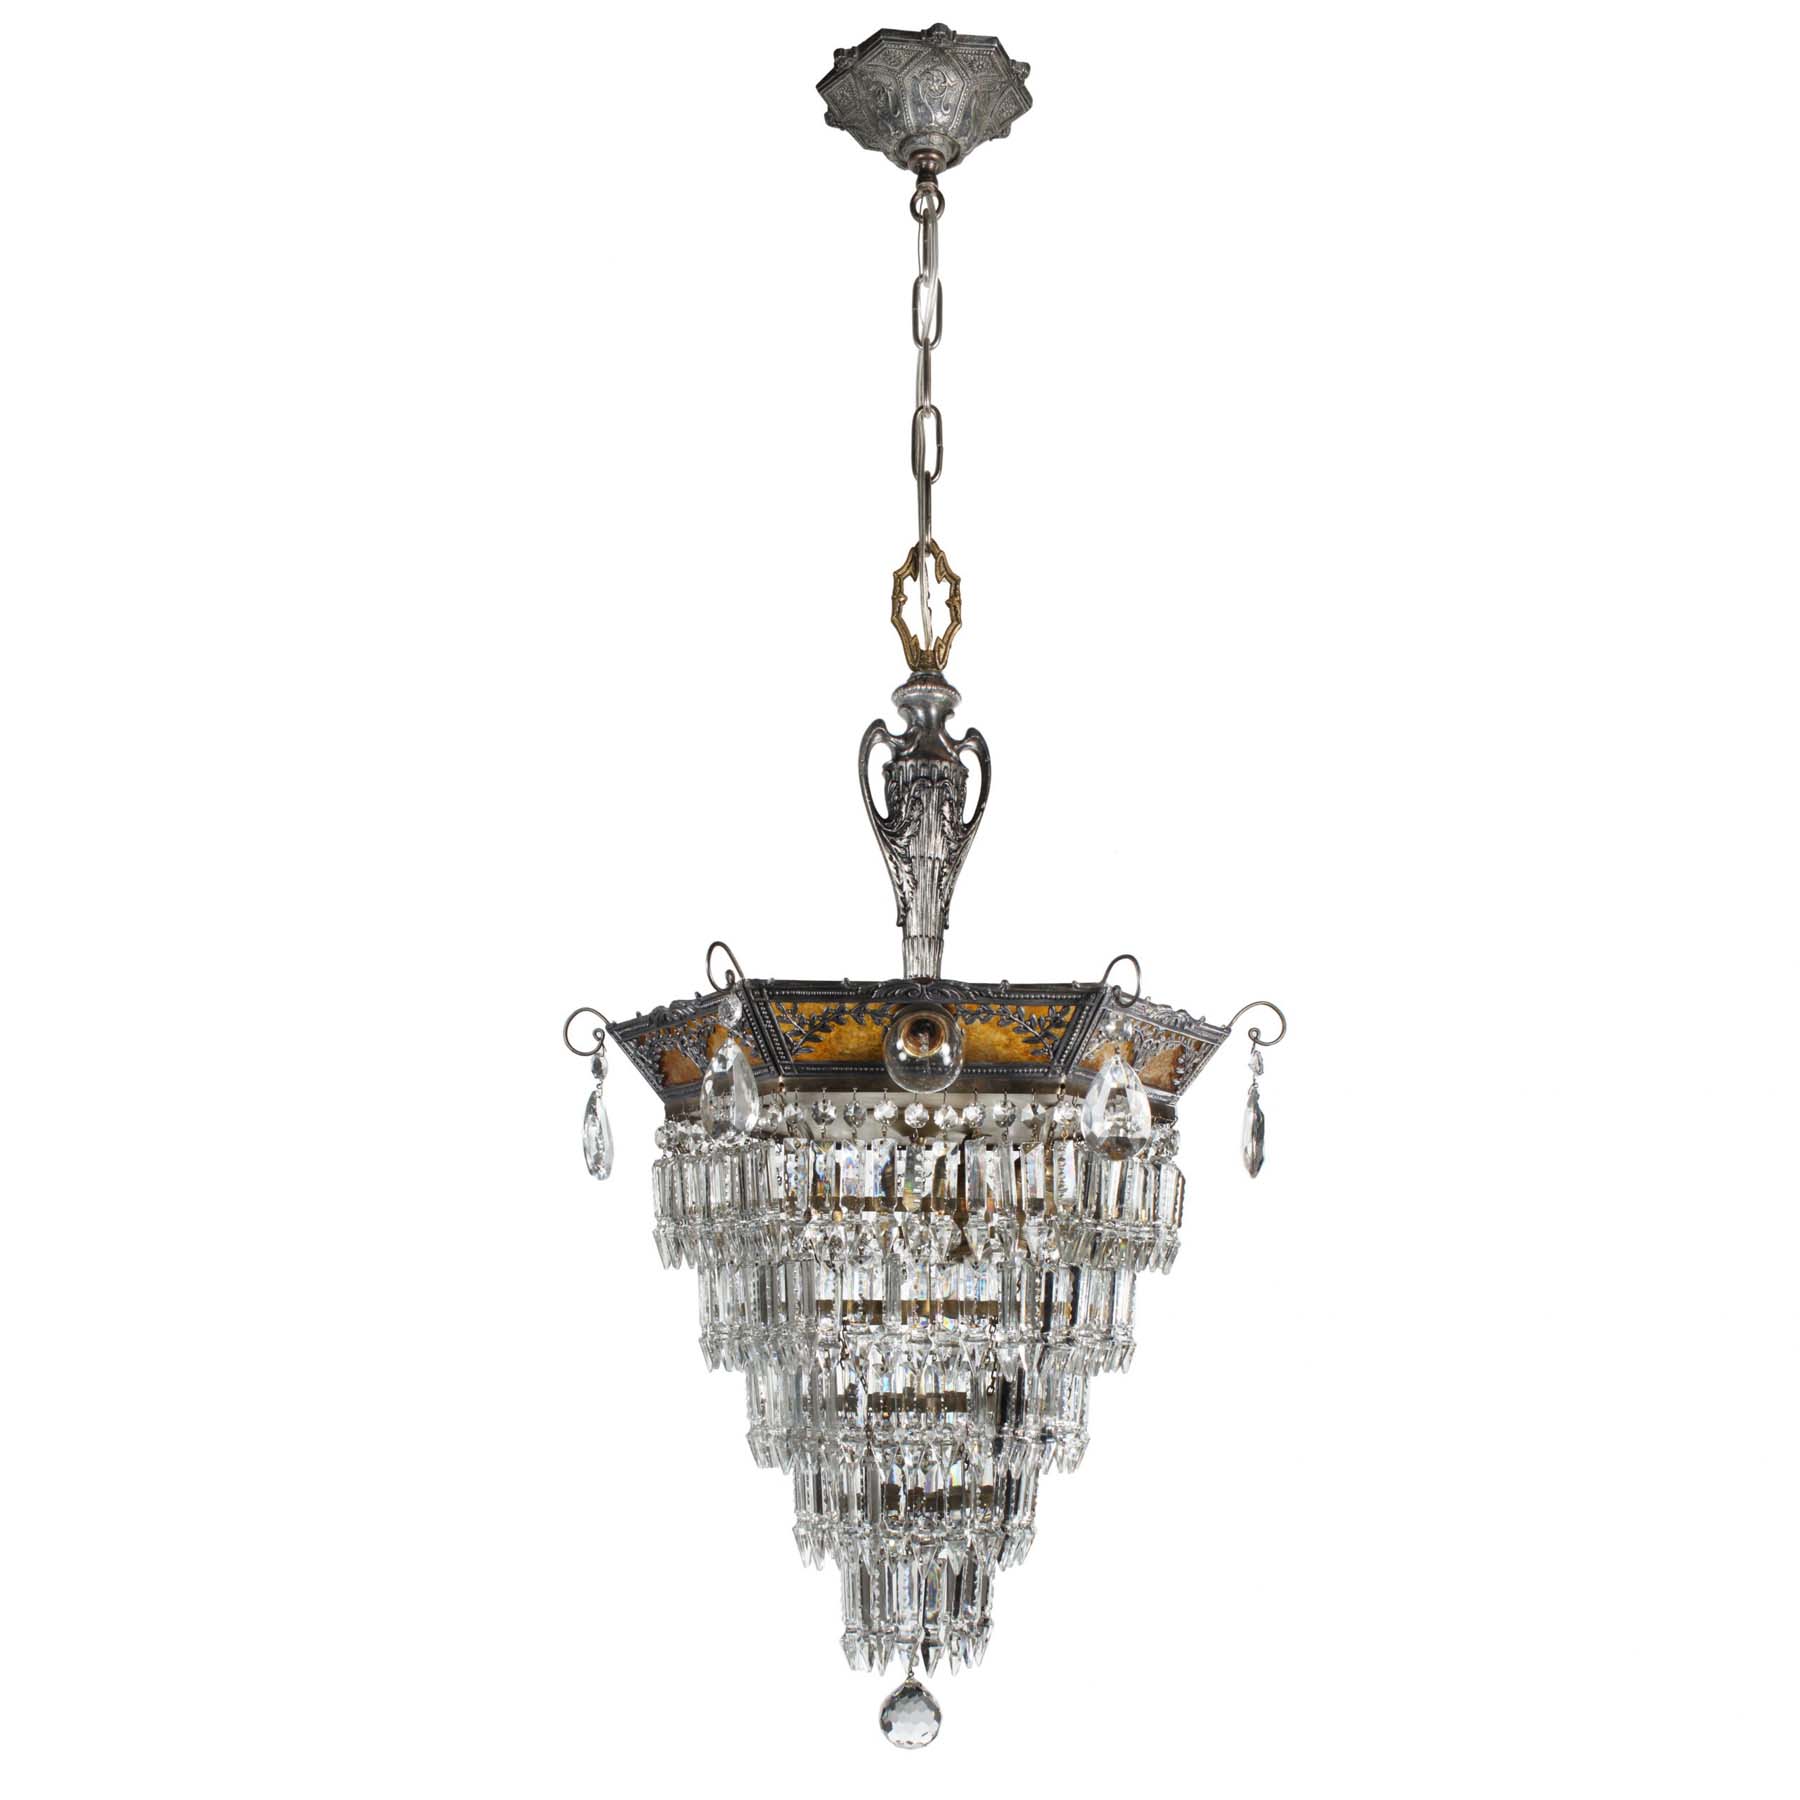 SOLD Antique Neoclassical Wedding Cake Chandelier with Mica-69898